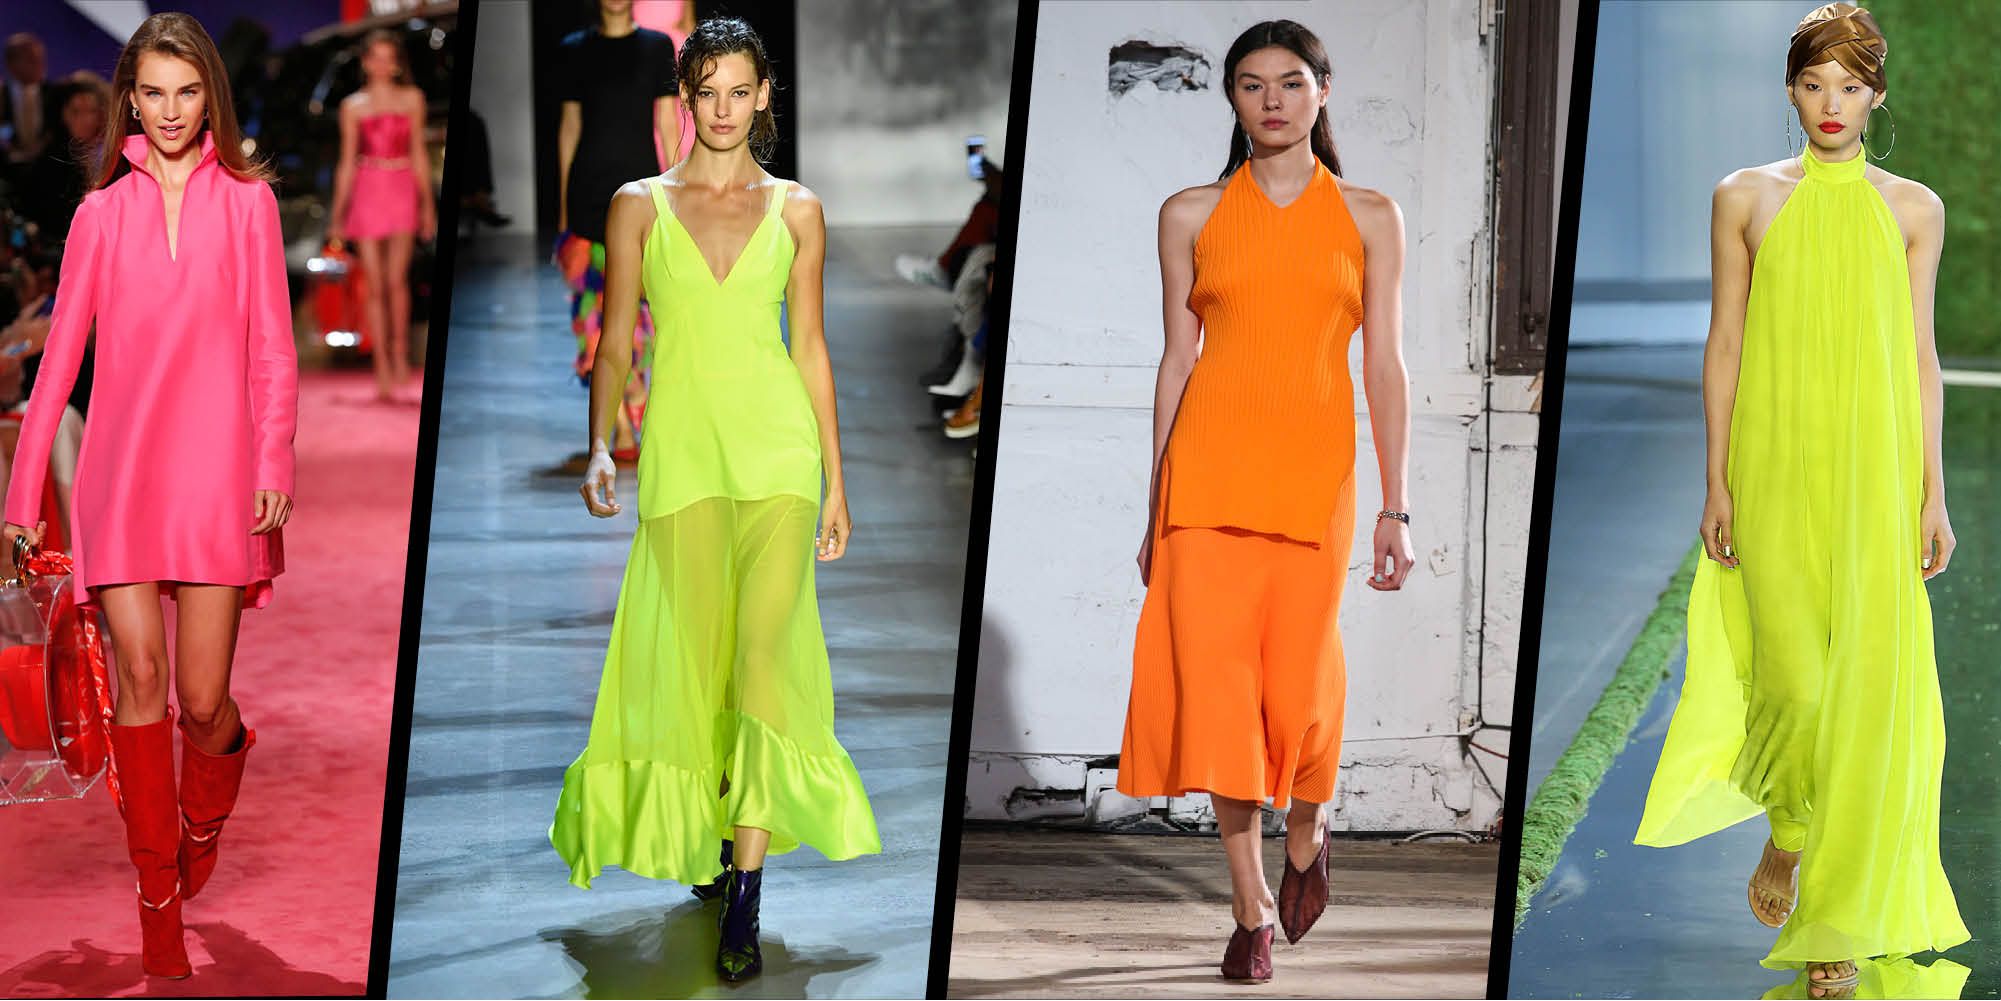 Neon brights on the catwalk